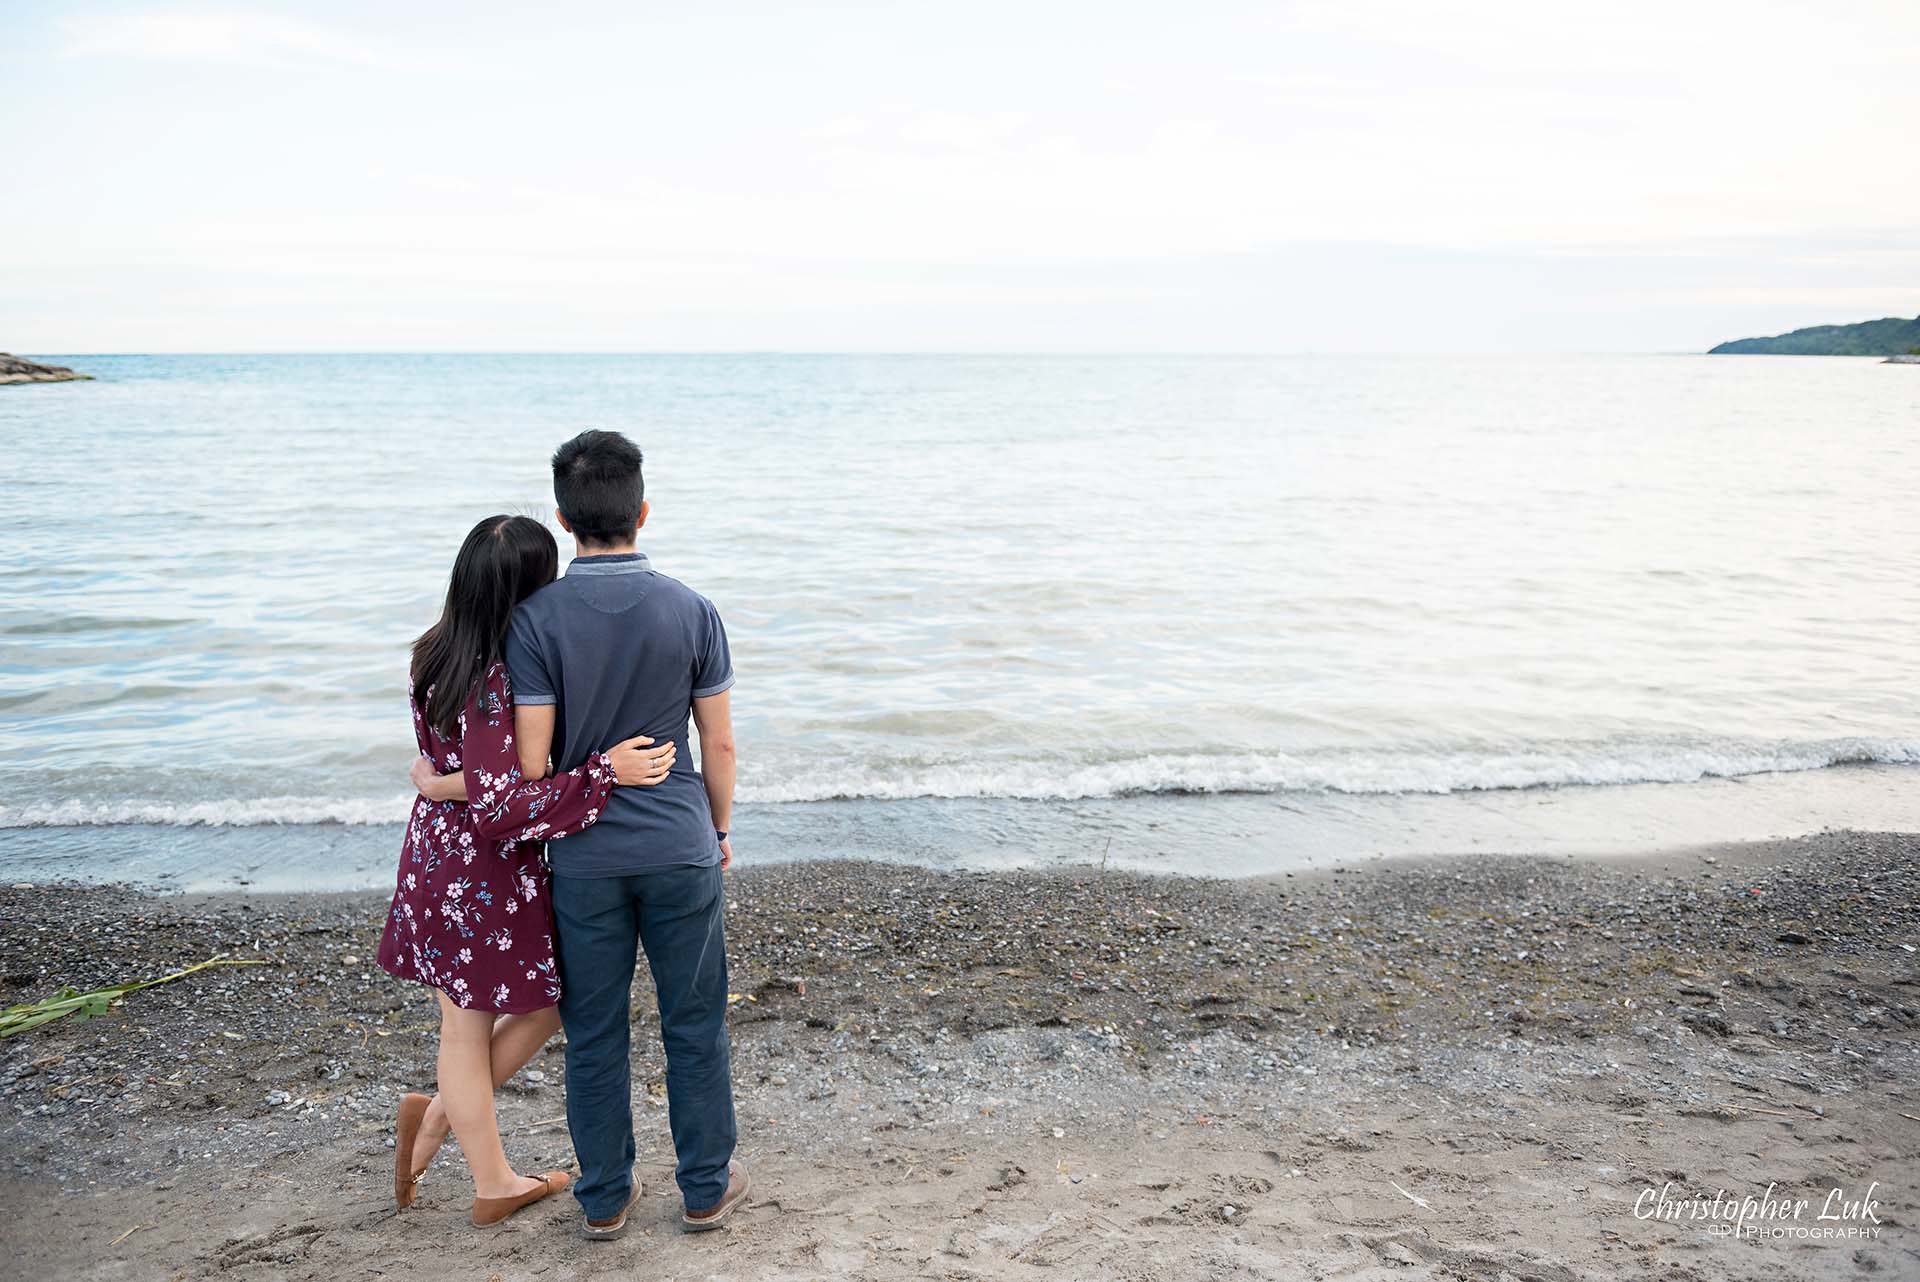 Christopher Luk Toronto Photographer Scarborough Bluffs Beach Park Sunset Surprise Wedding Marriage Engagement Proposal Candid Natural Photojournalistic Bride Groom Waterfront Water Lake Ontario Background Hug Sand